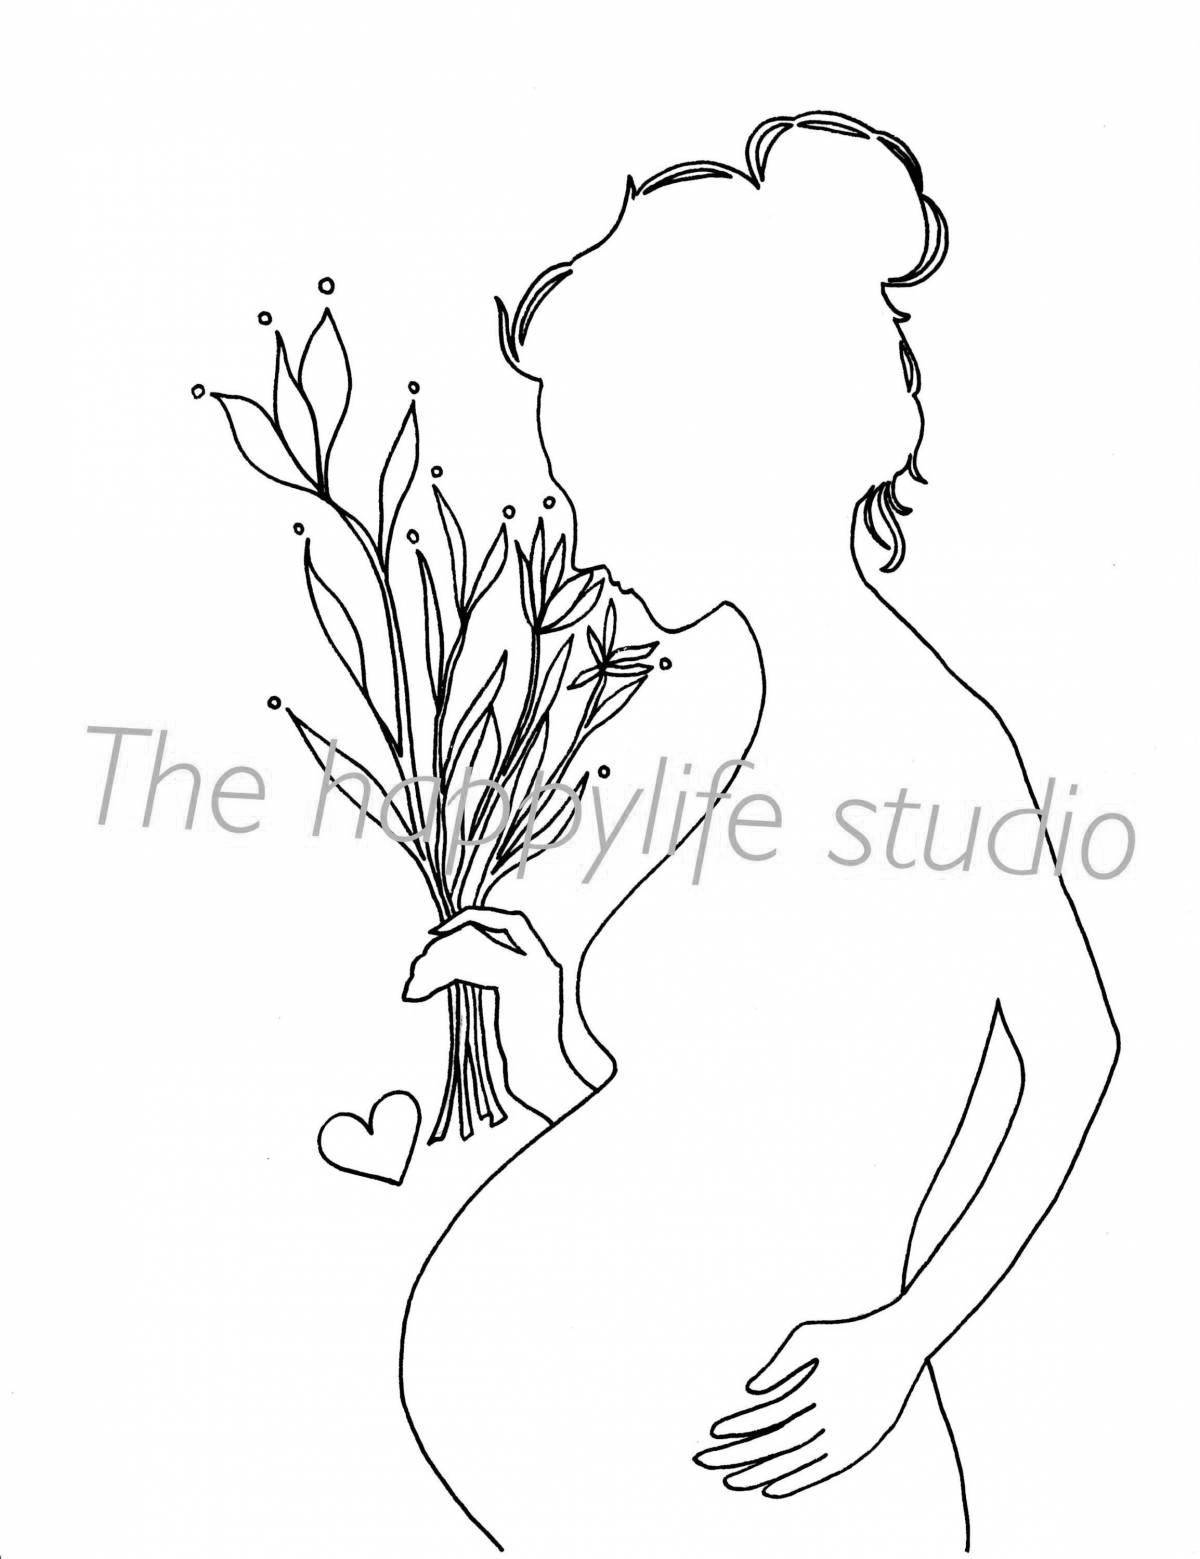 Awesome pregnant woman coloring page